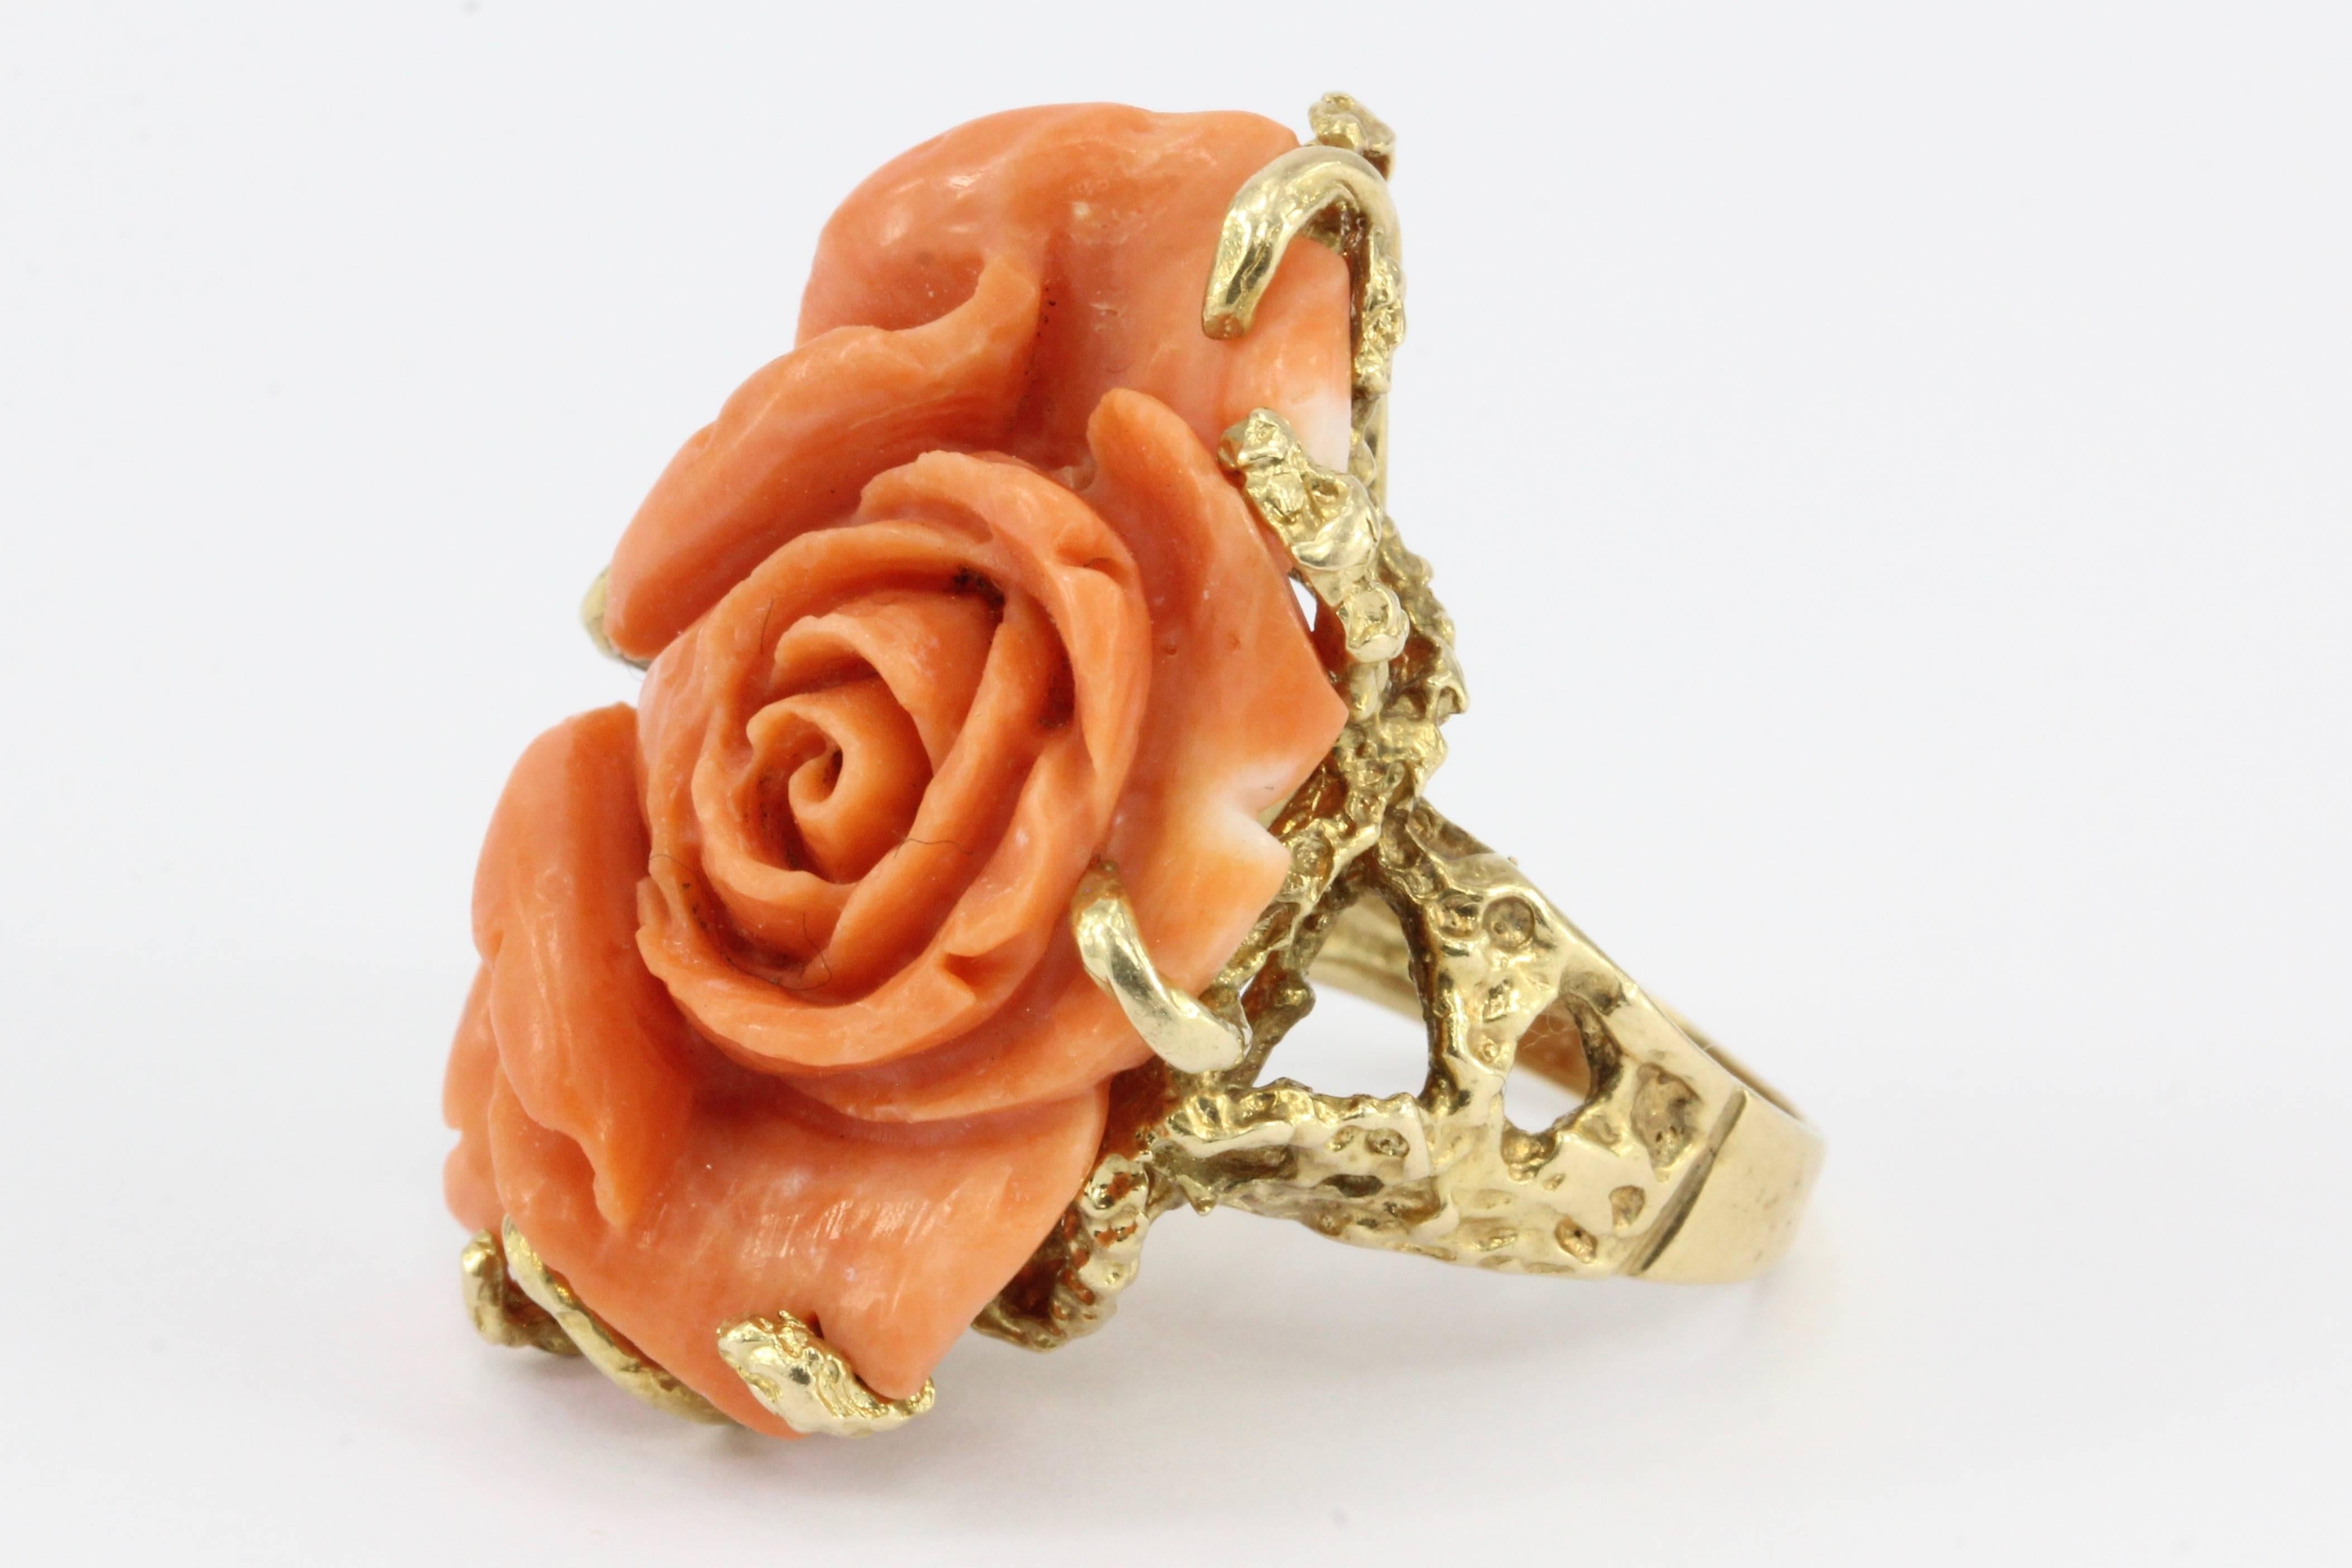 Era: Retro c. 1970s

Composition: 14K yellow gold

Primary Stone: Coral

Ring Face: 24mm wide x 36mm high

Rise Above Finger: 16 mm

Ring Size: 7

Ring Weight: 15.1 grams

Ring Condition: Excellent estate condition, ready to wear